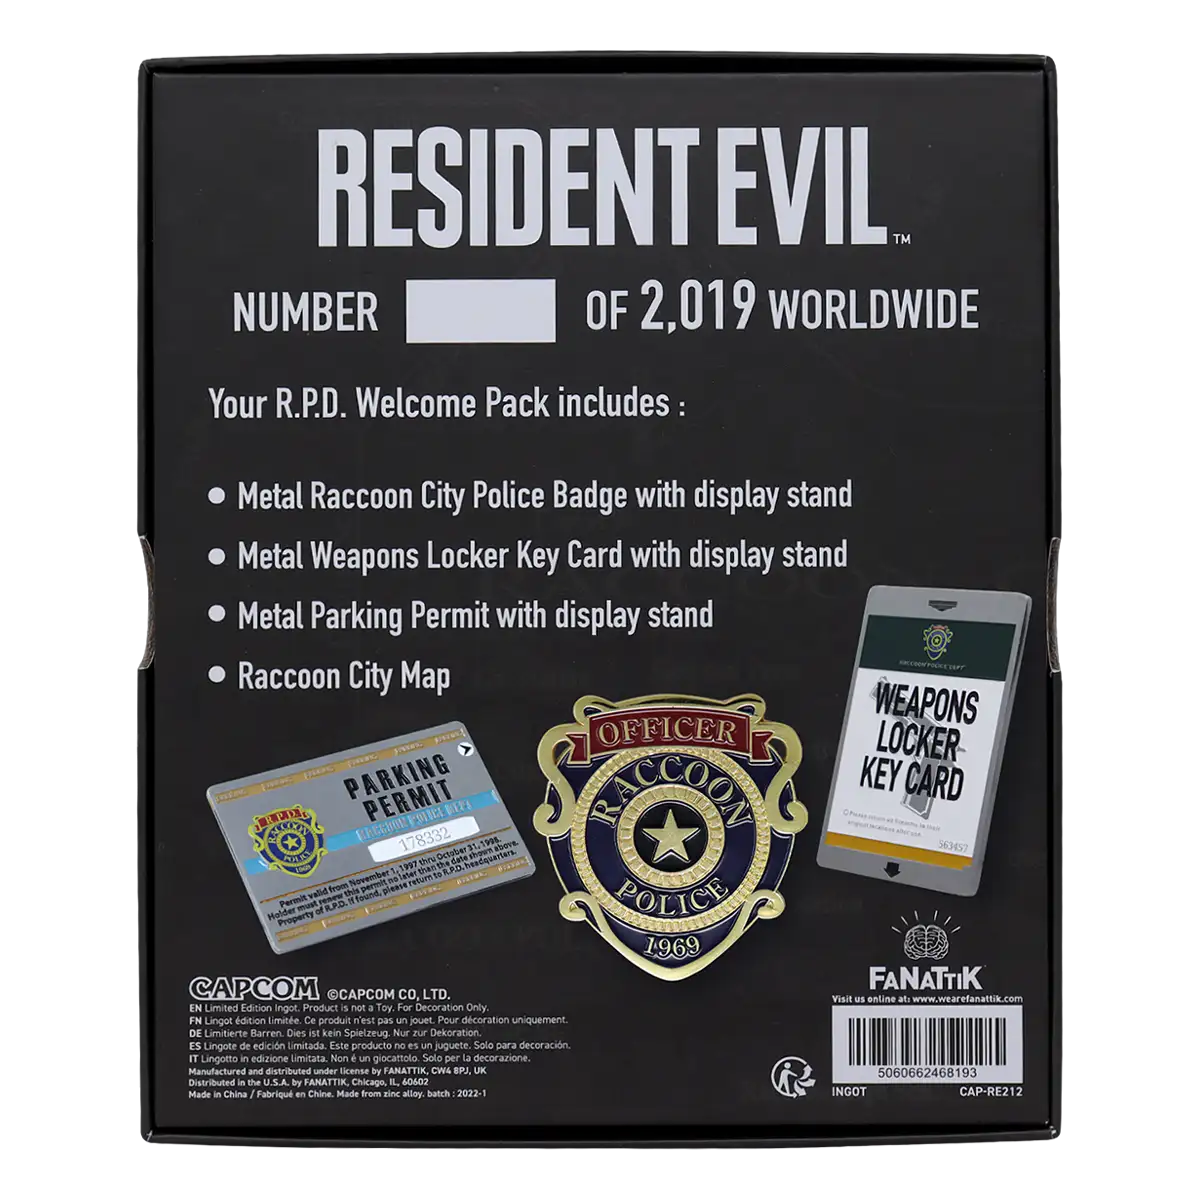 Resident Evil R.P.D Welcome Pack